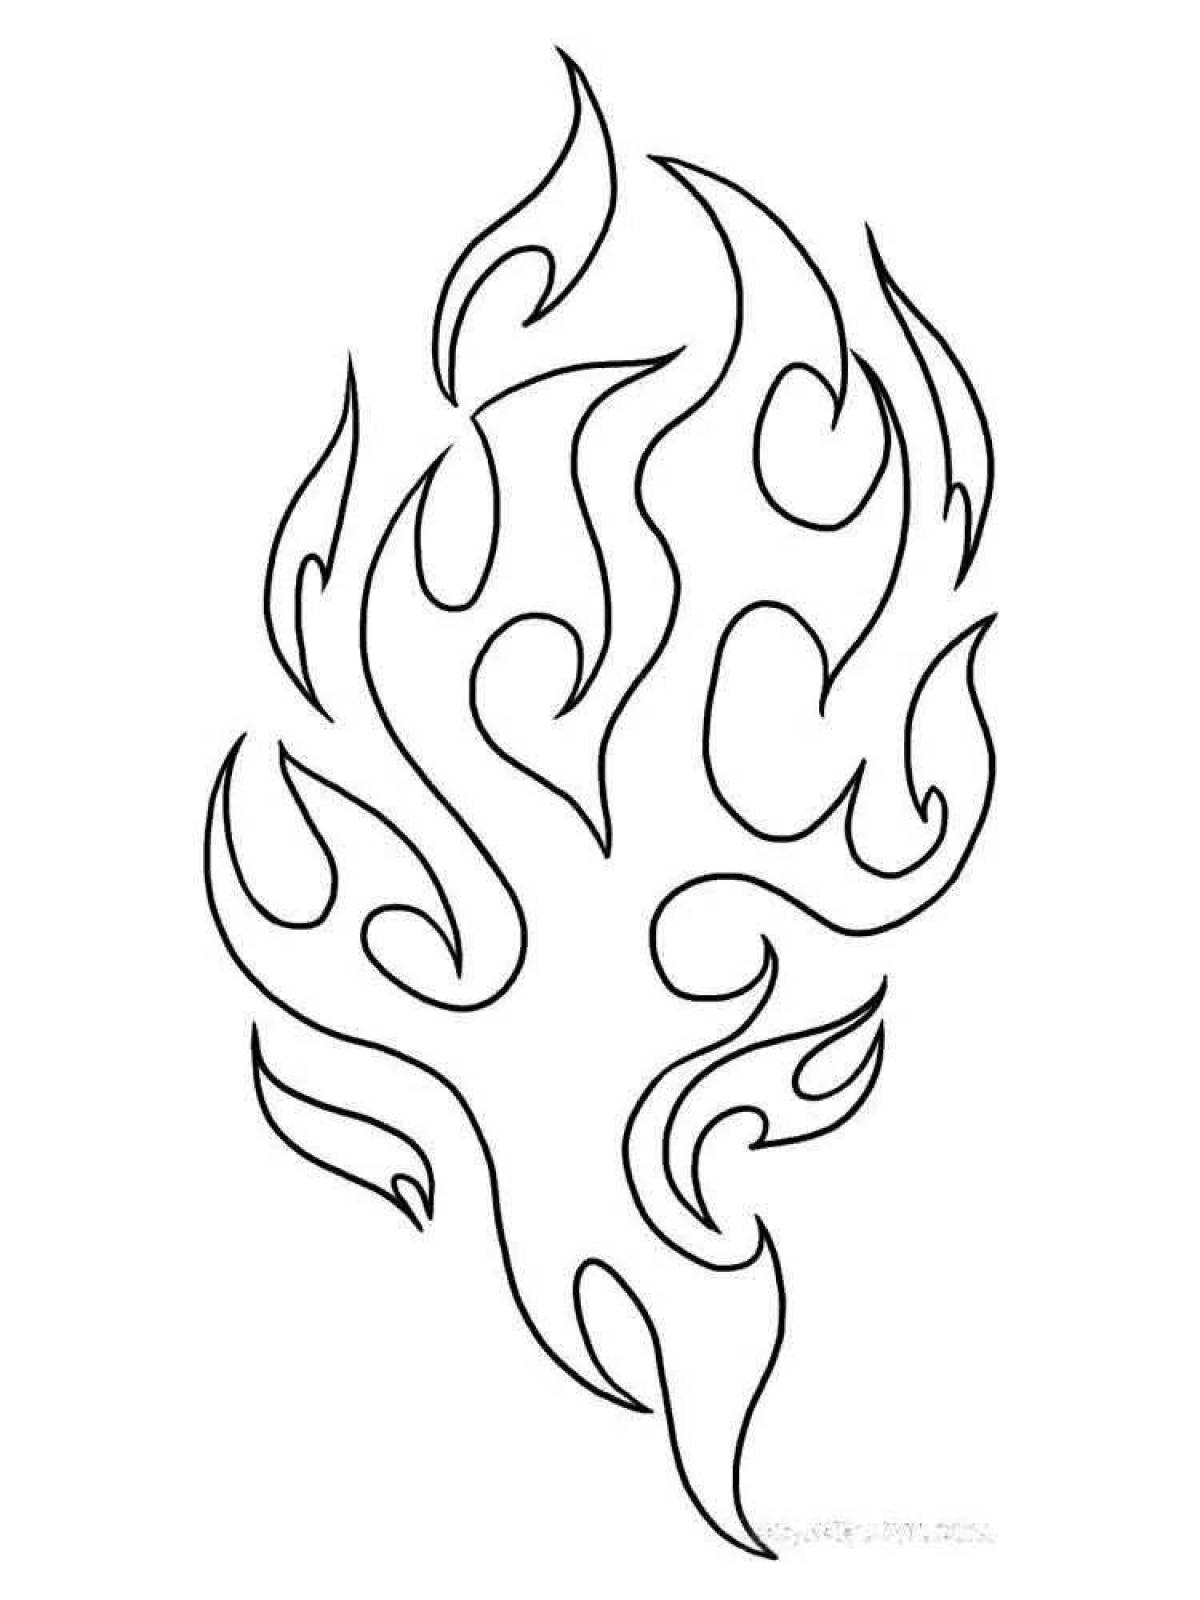 Flame dazzle coloring book